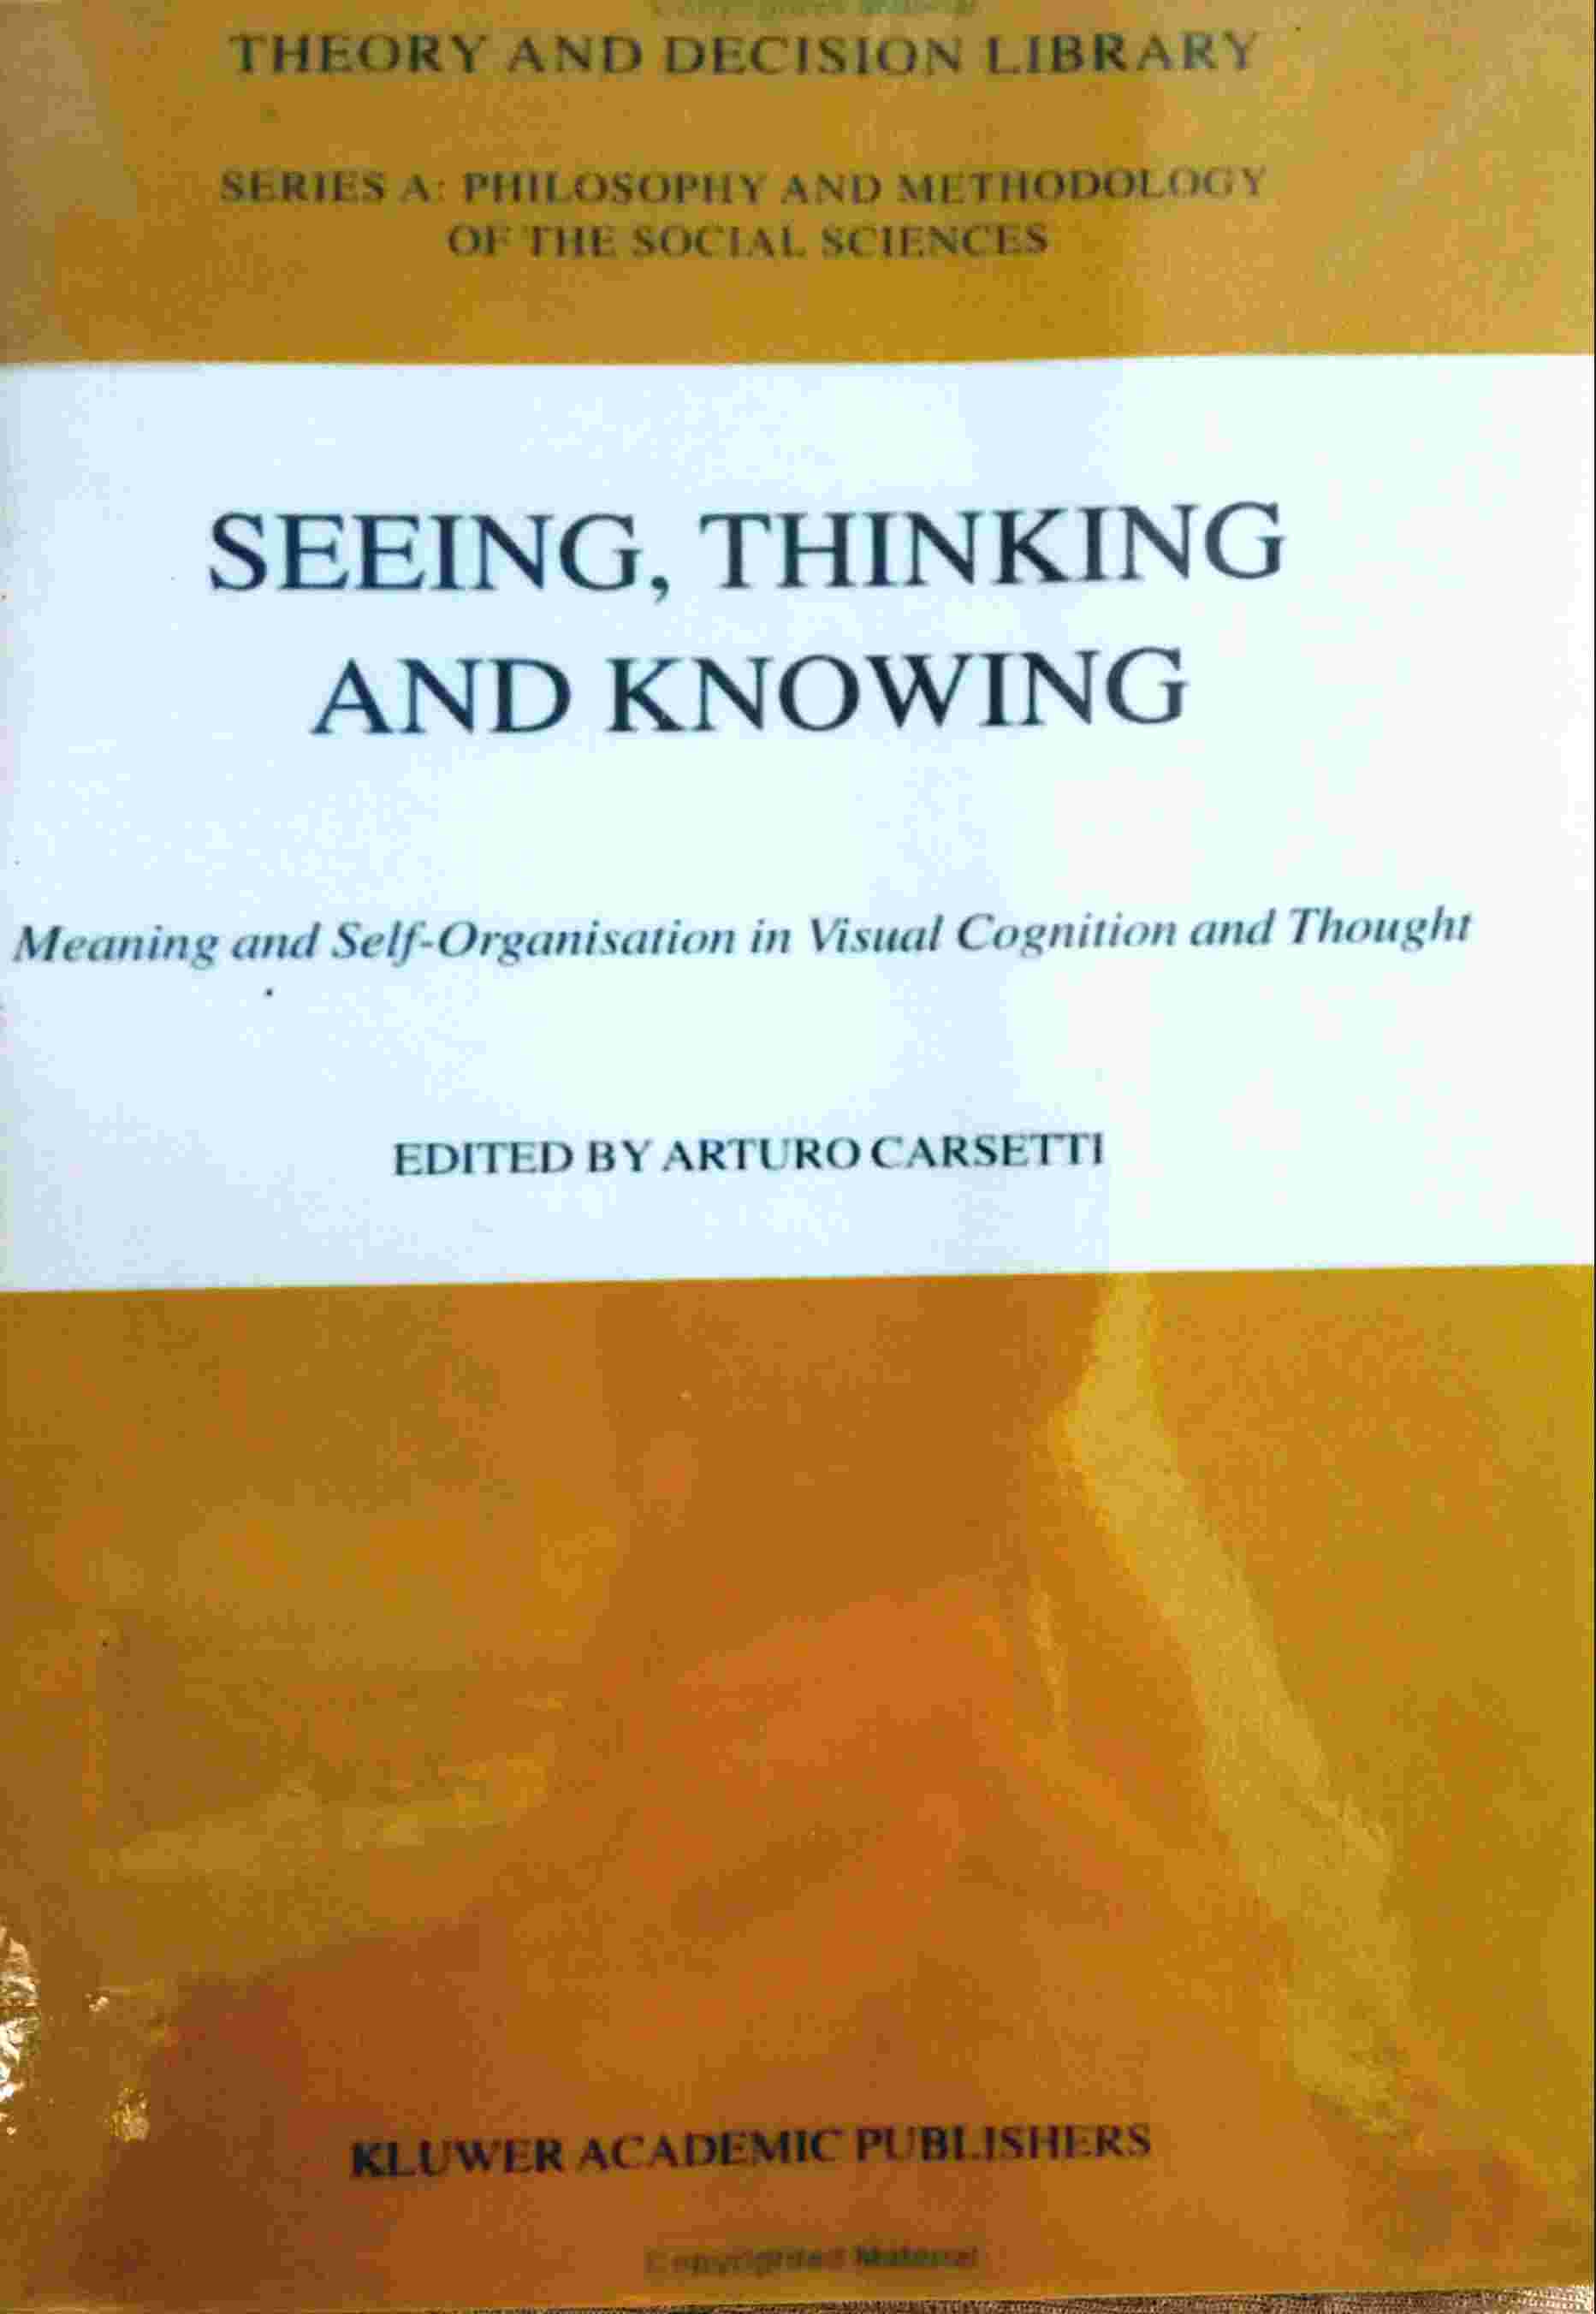 SEEING, THINKING AND KNOWING